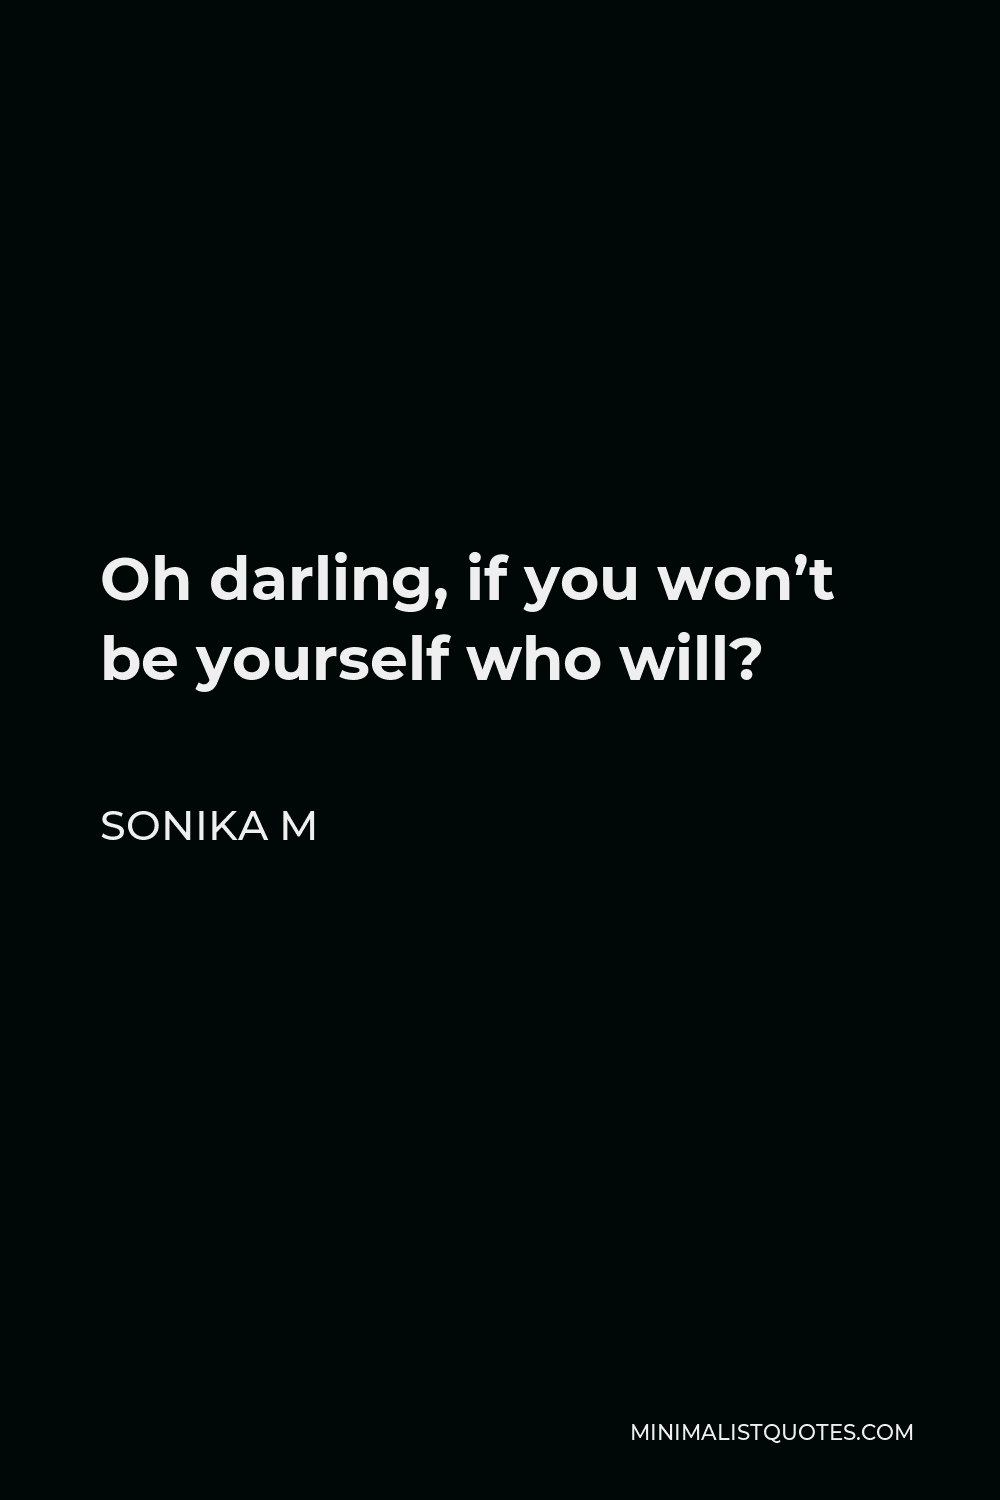 Sonika M Quote - Oh darling, if you won’t be yourself who will?